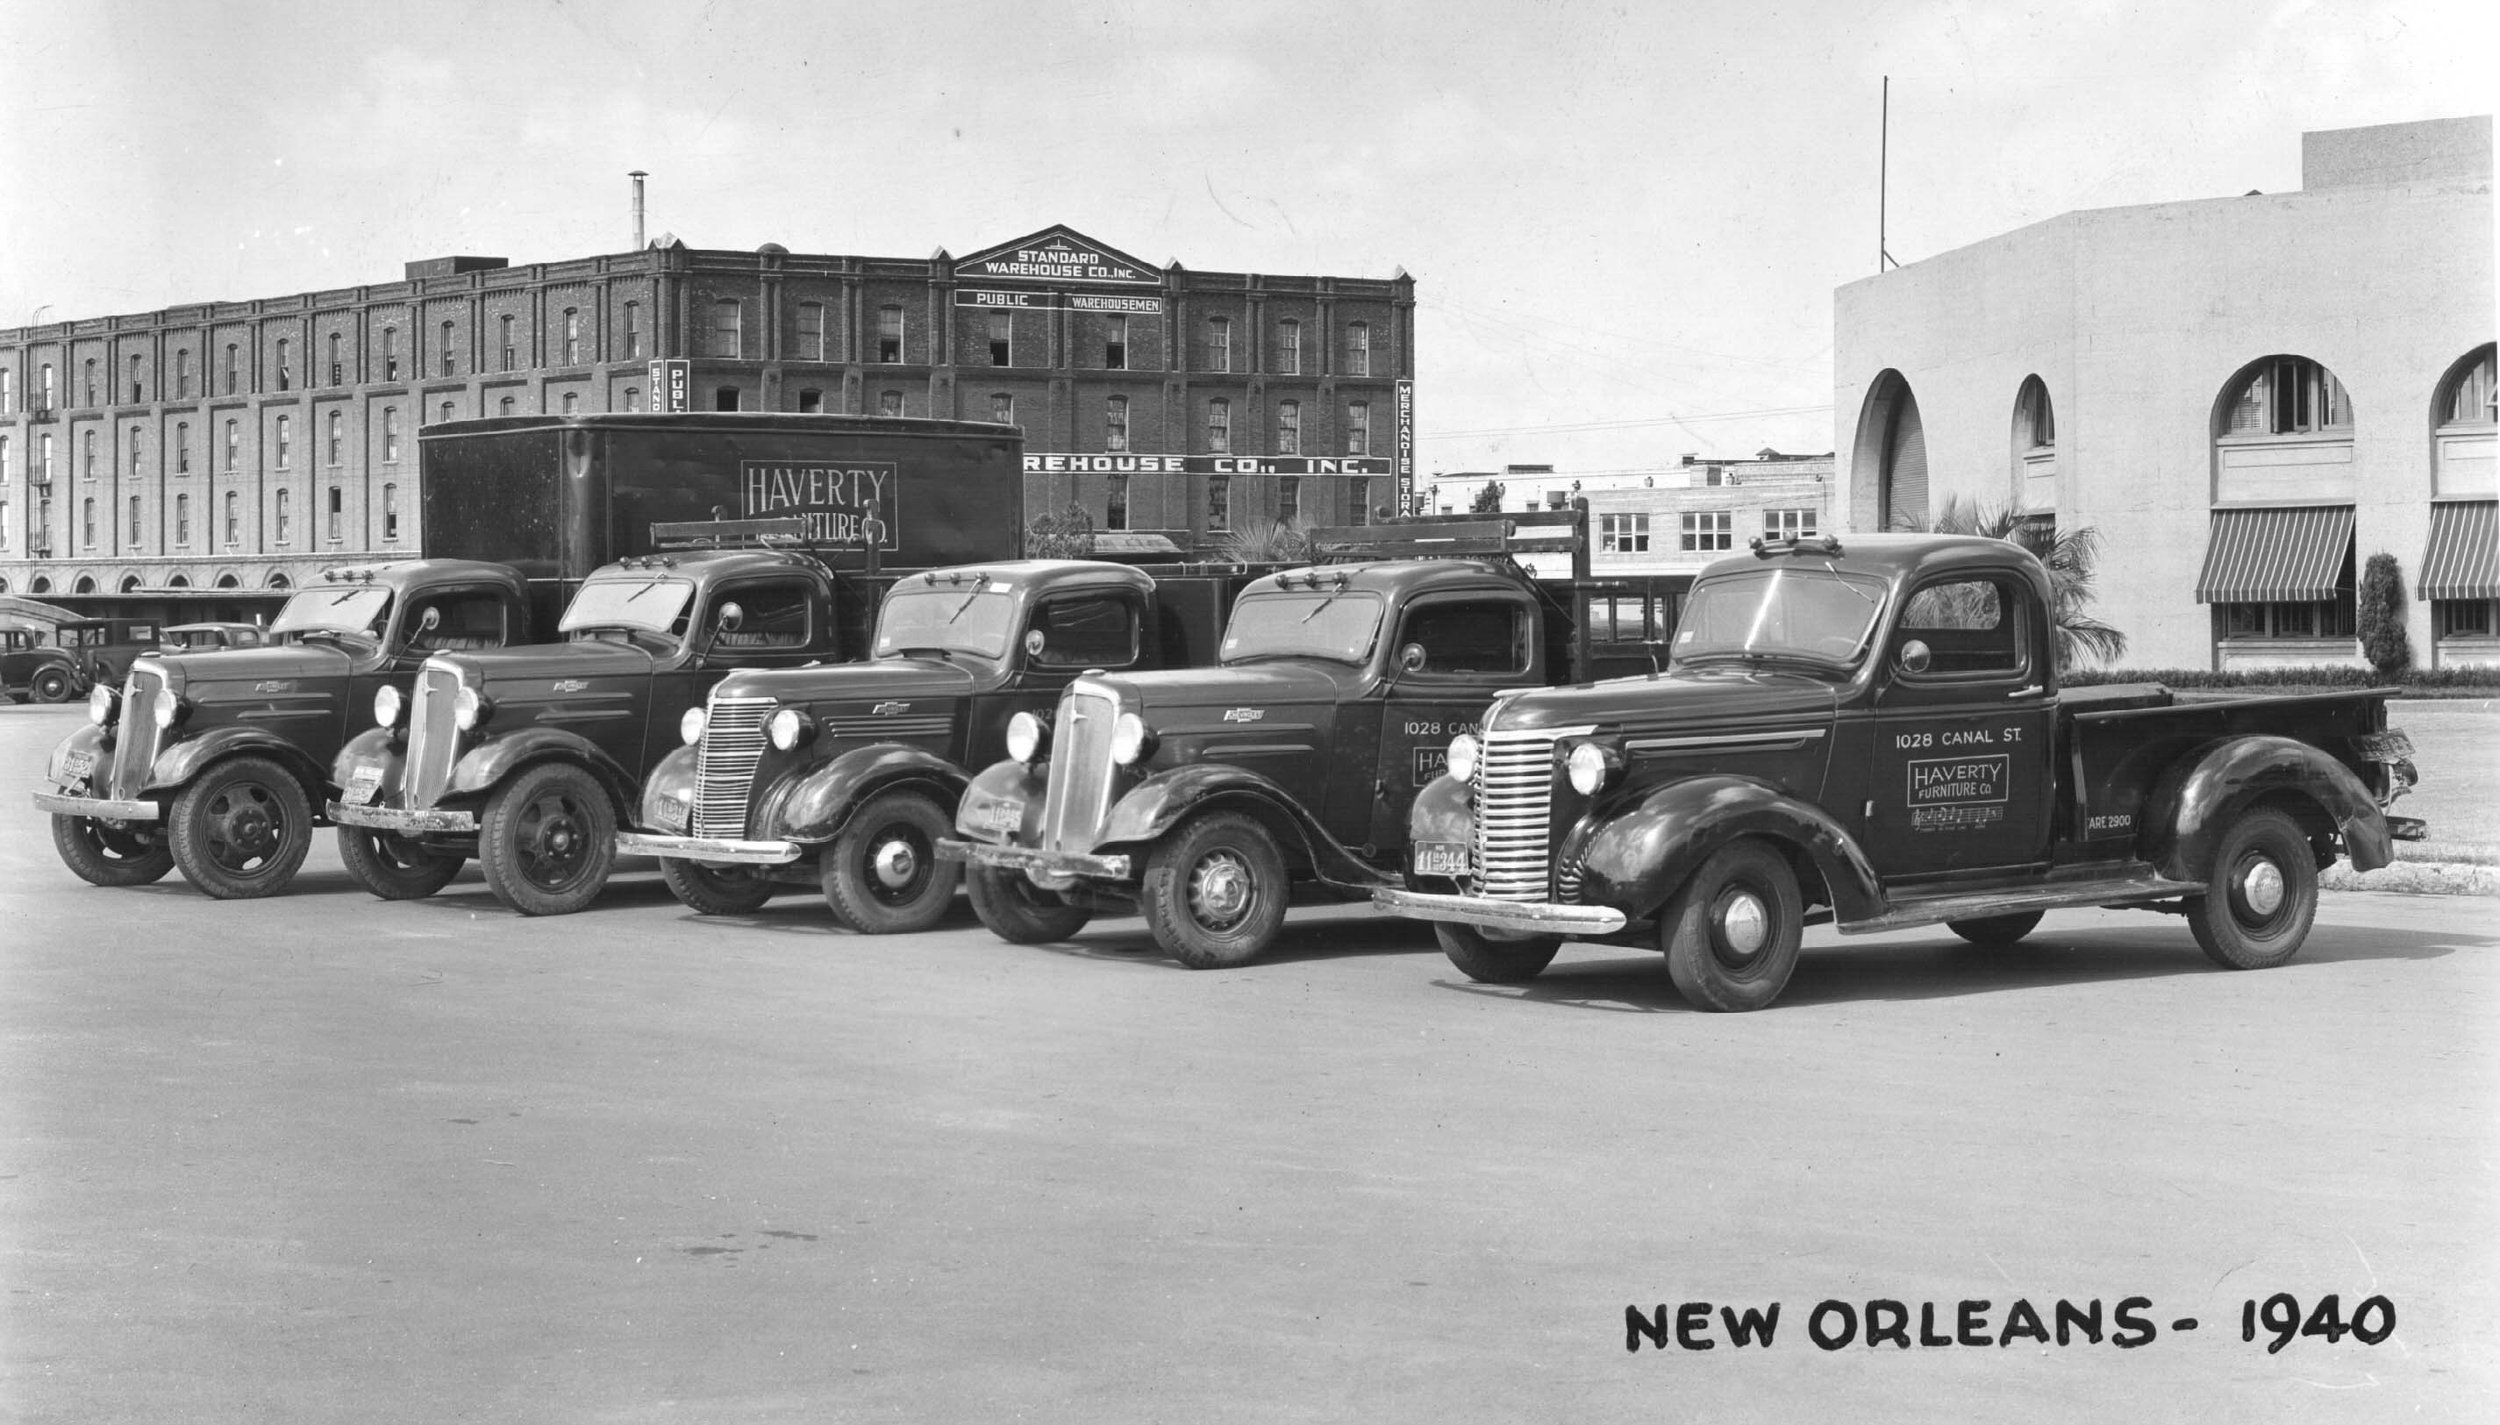 Havertys Furniture Co. warehouse in New Orleans, 1940